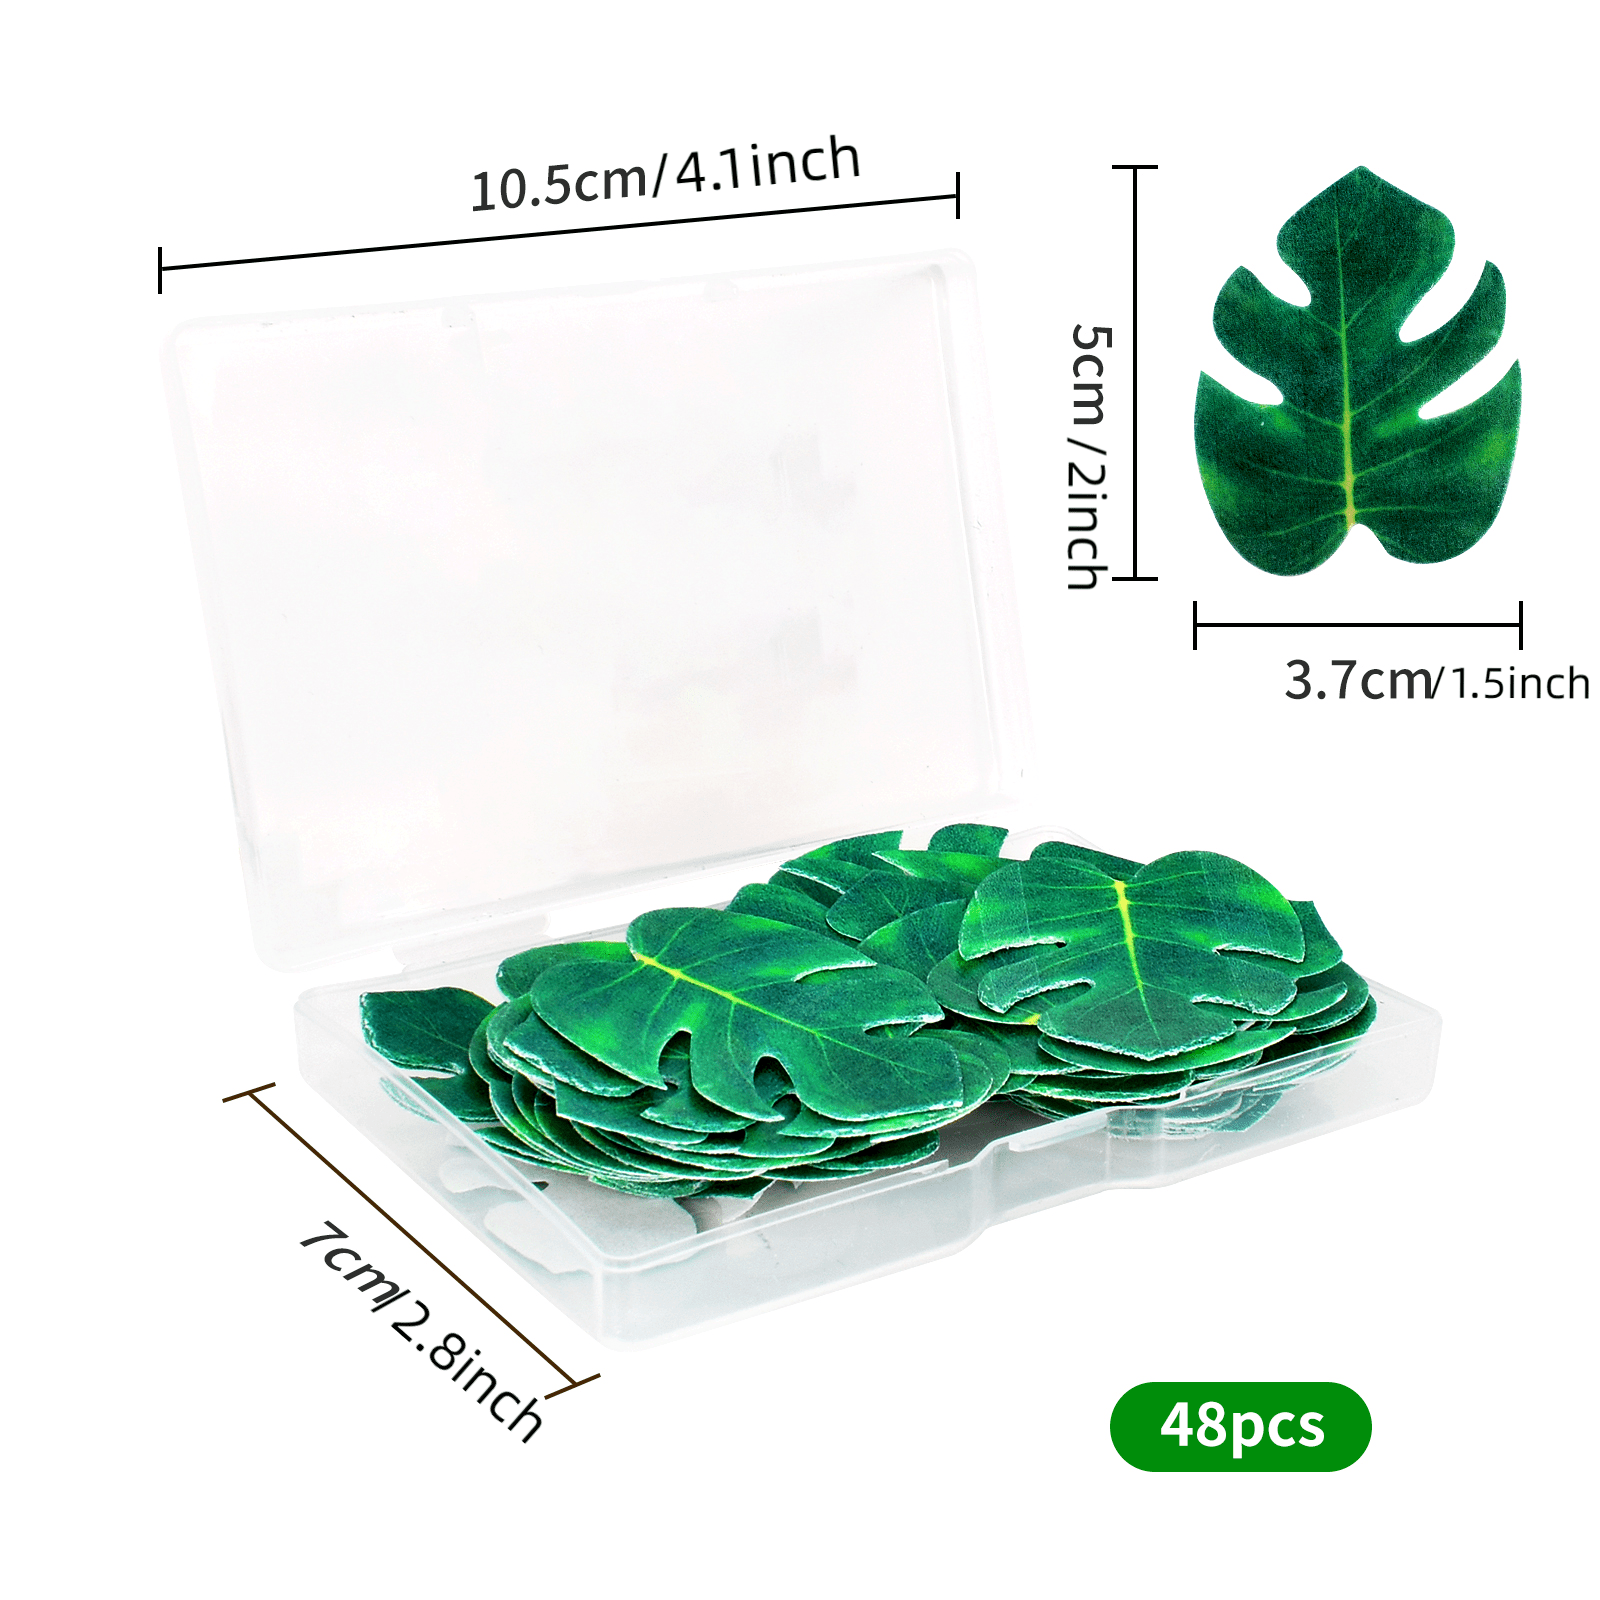 83pcs Edible Tropical Turtle Leaves Flower Cupcake Toppers Wafer